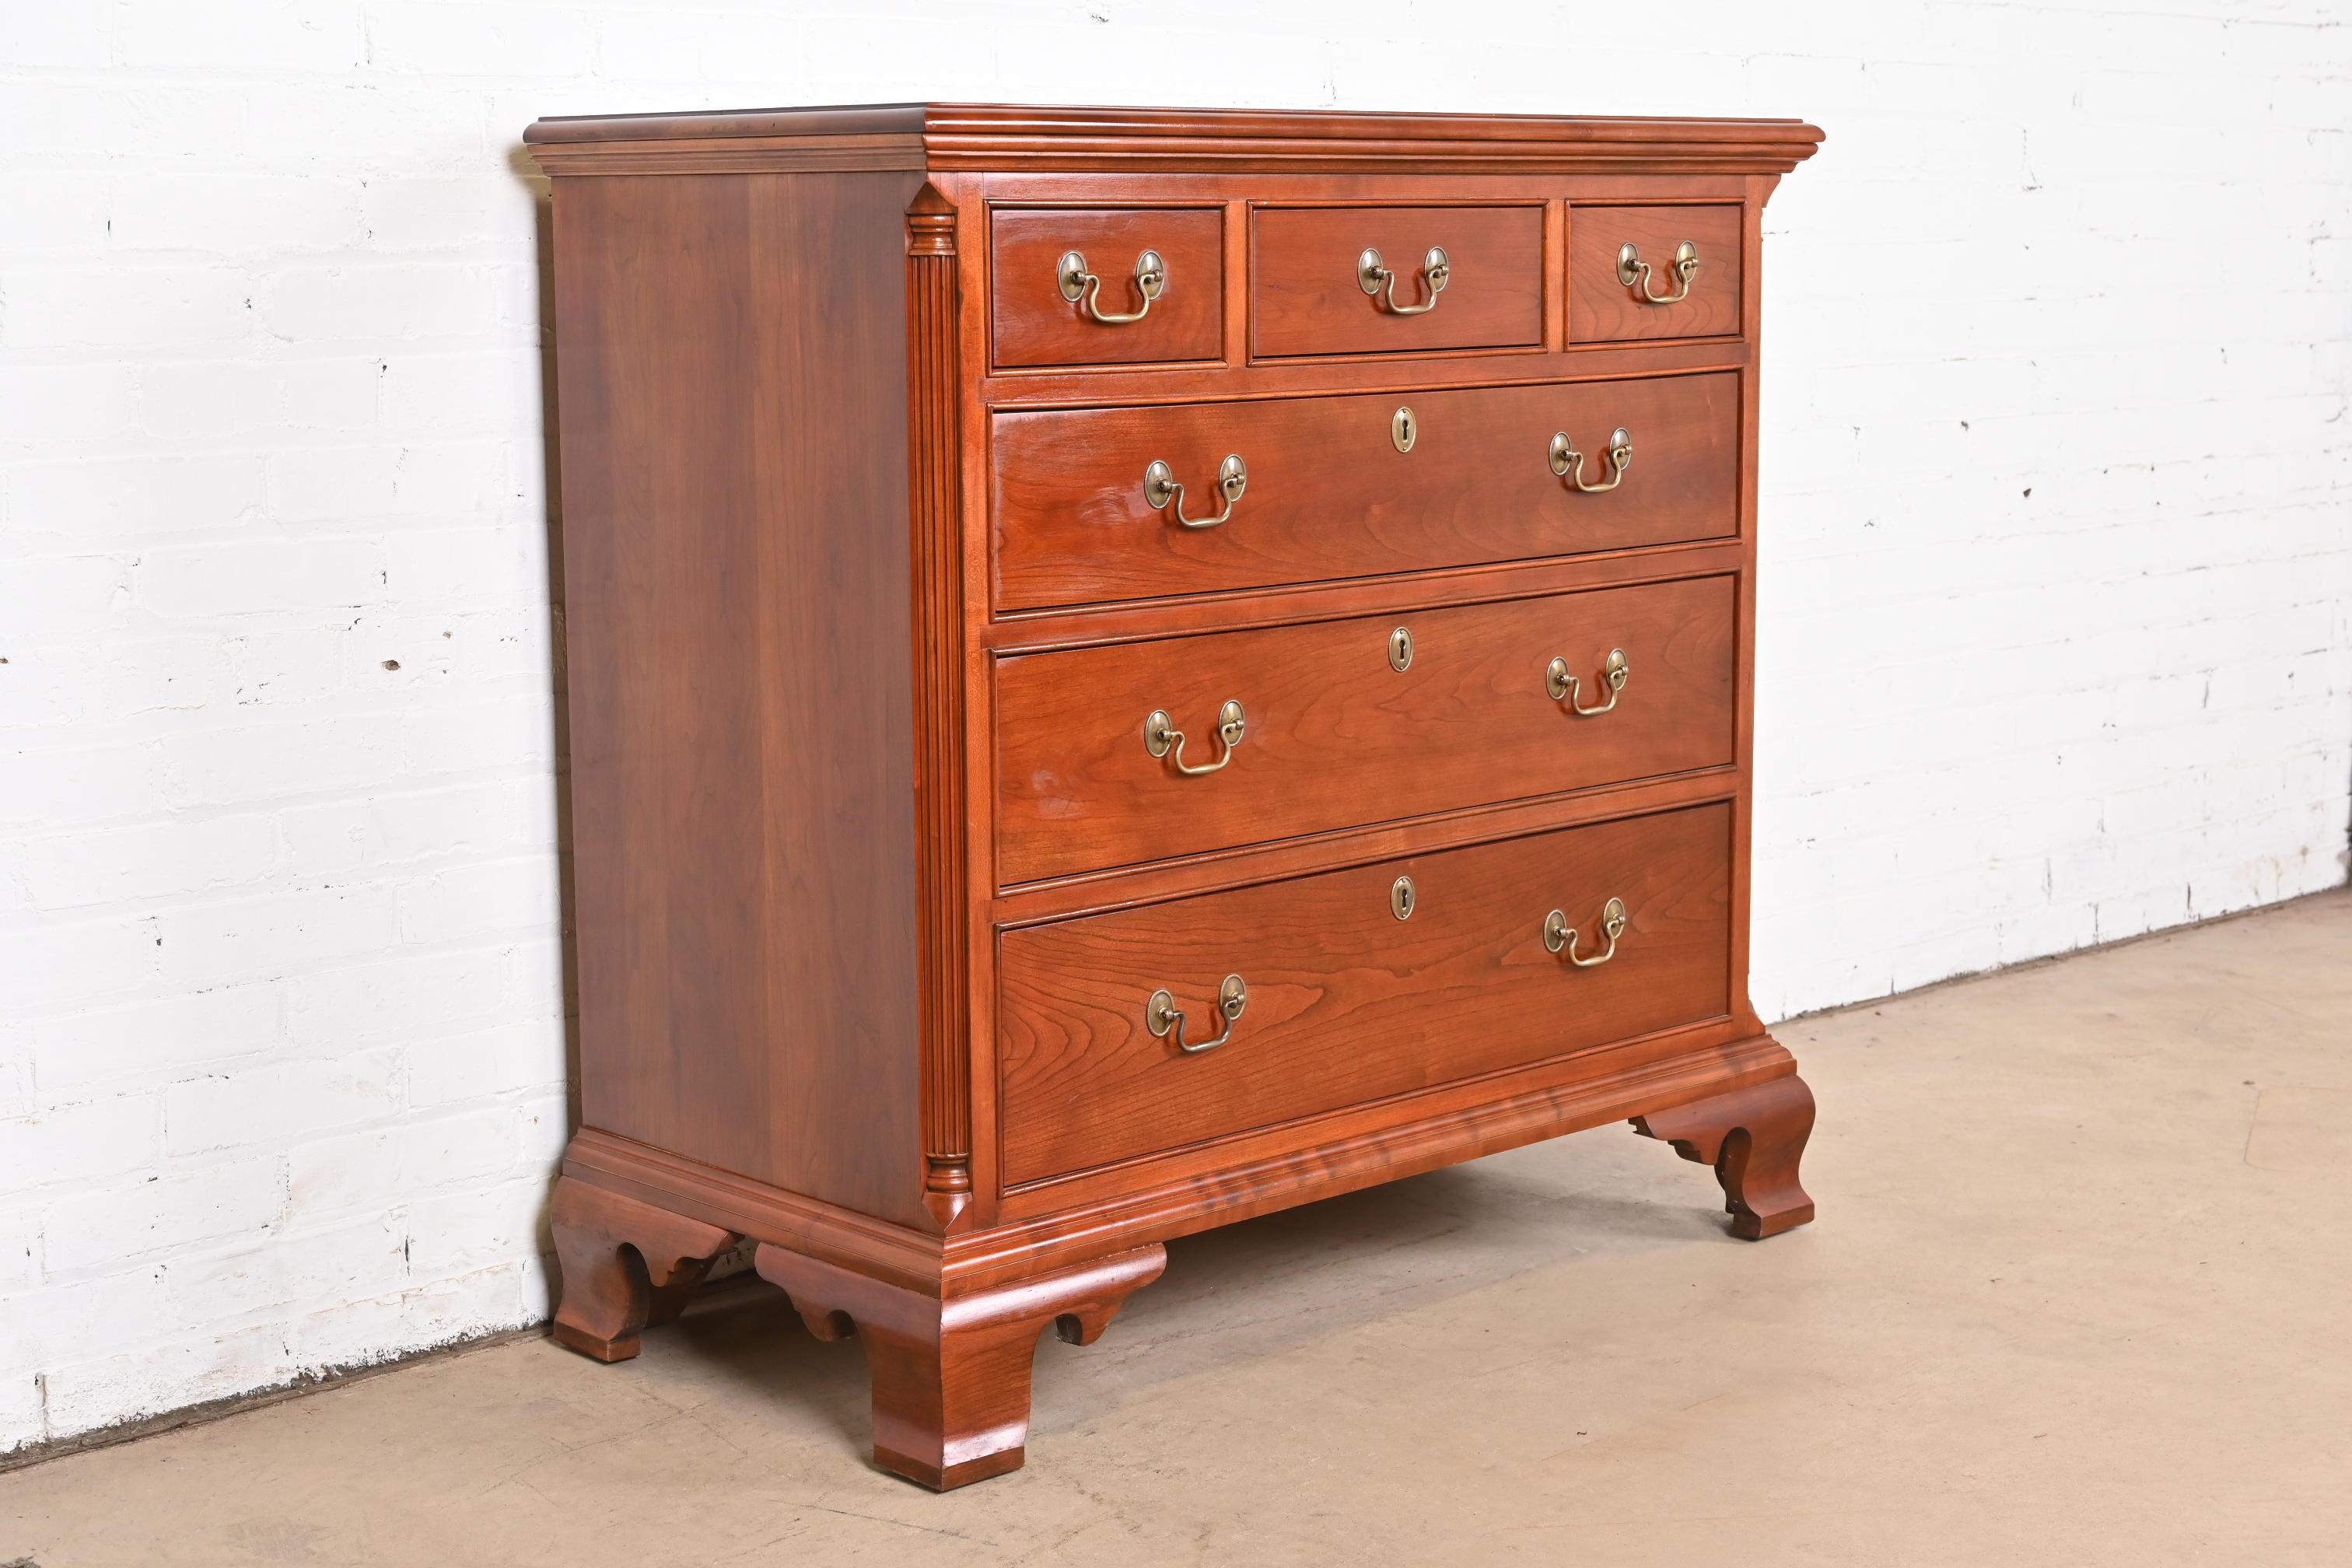 20th Century Stickley Georgian Solid Cherry Wood Six-Drawer Chest of Drawers